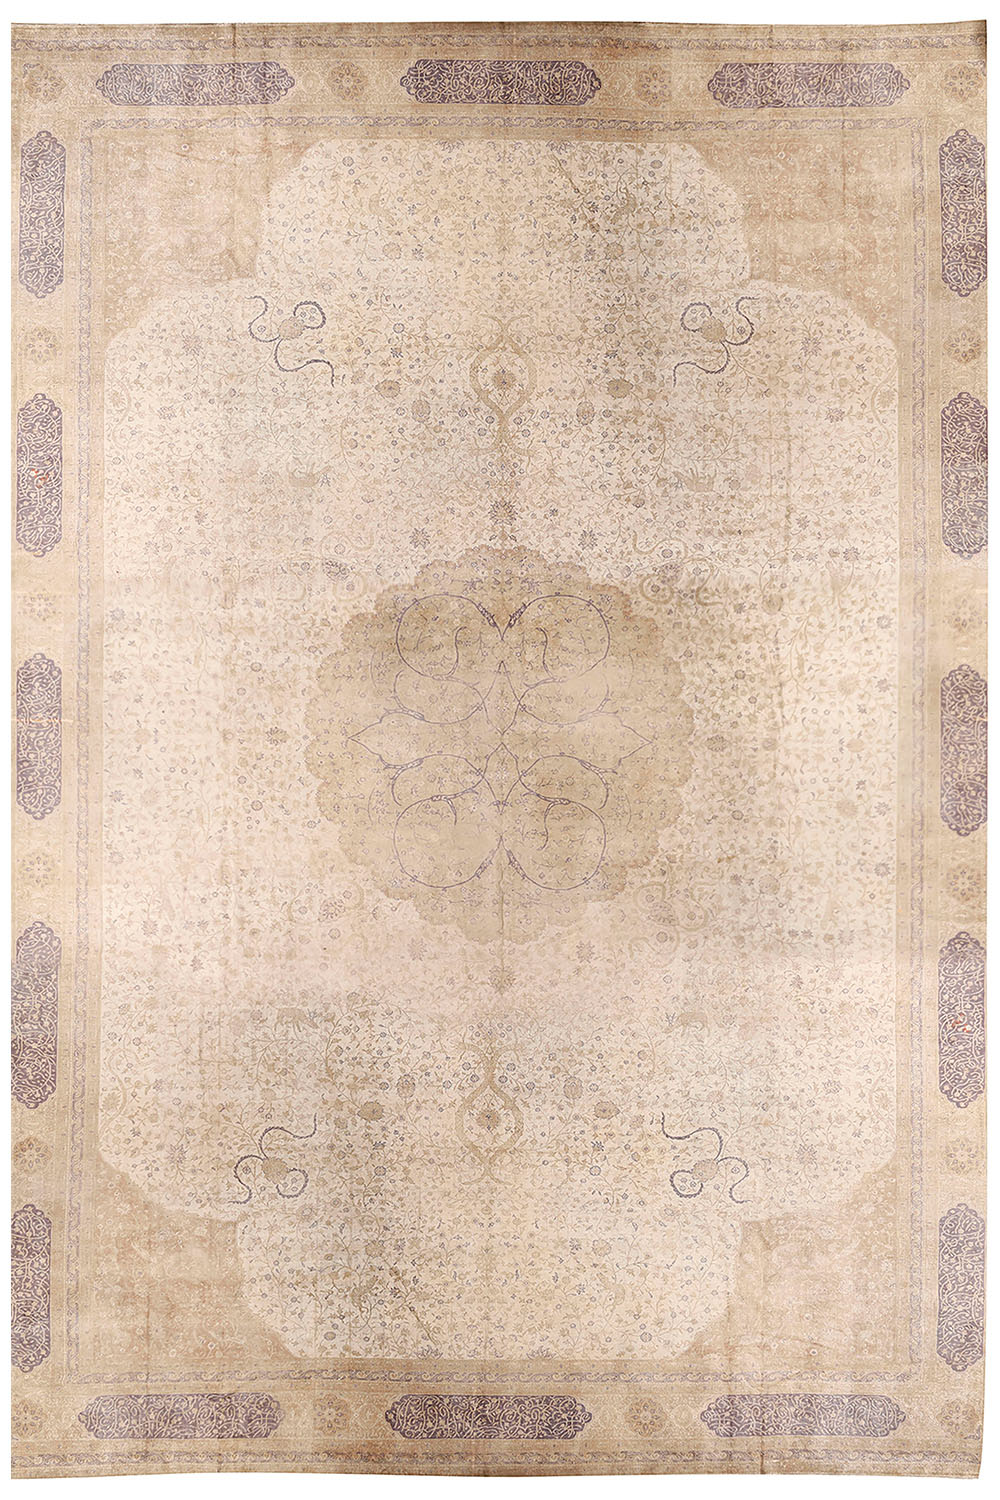 Zohreh, vintage Persian Scatter rug 2'4 x 3'5 – Sapere Collection